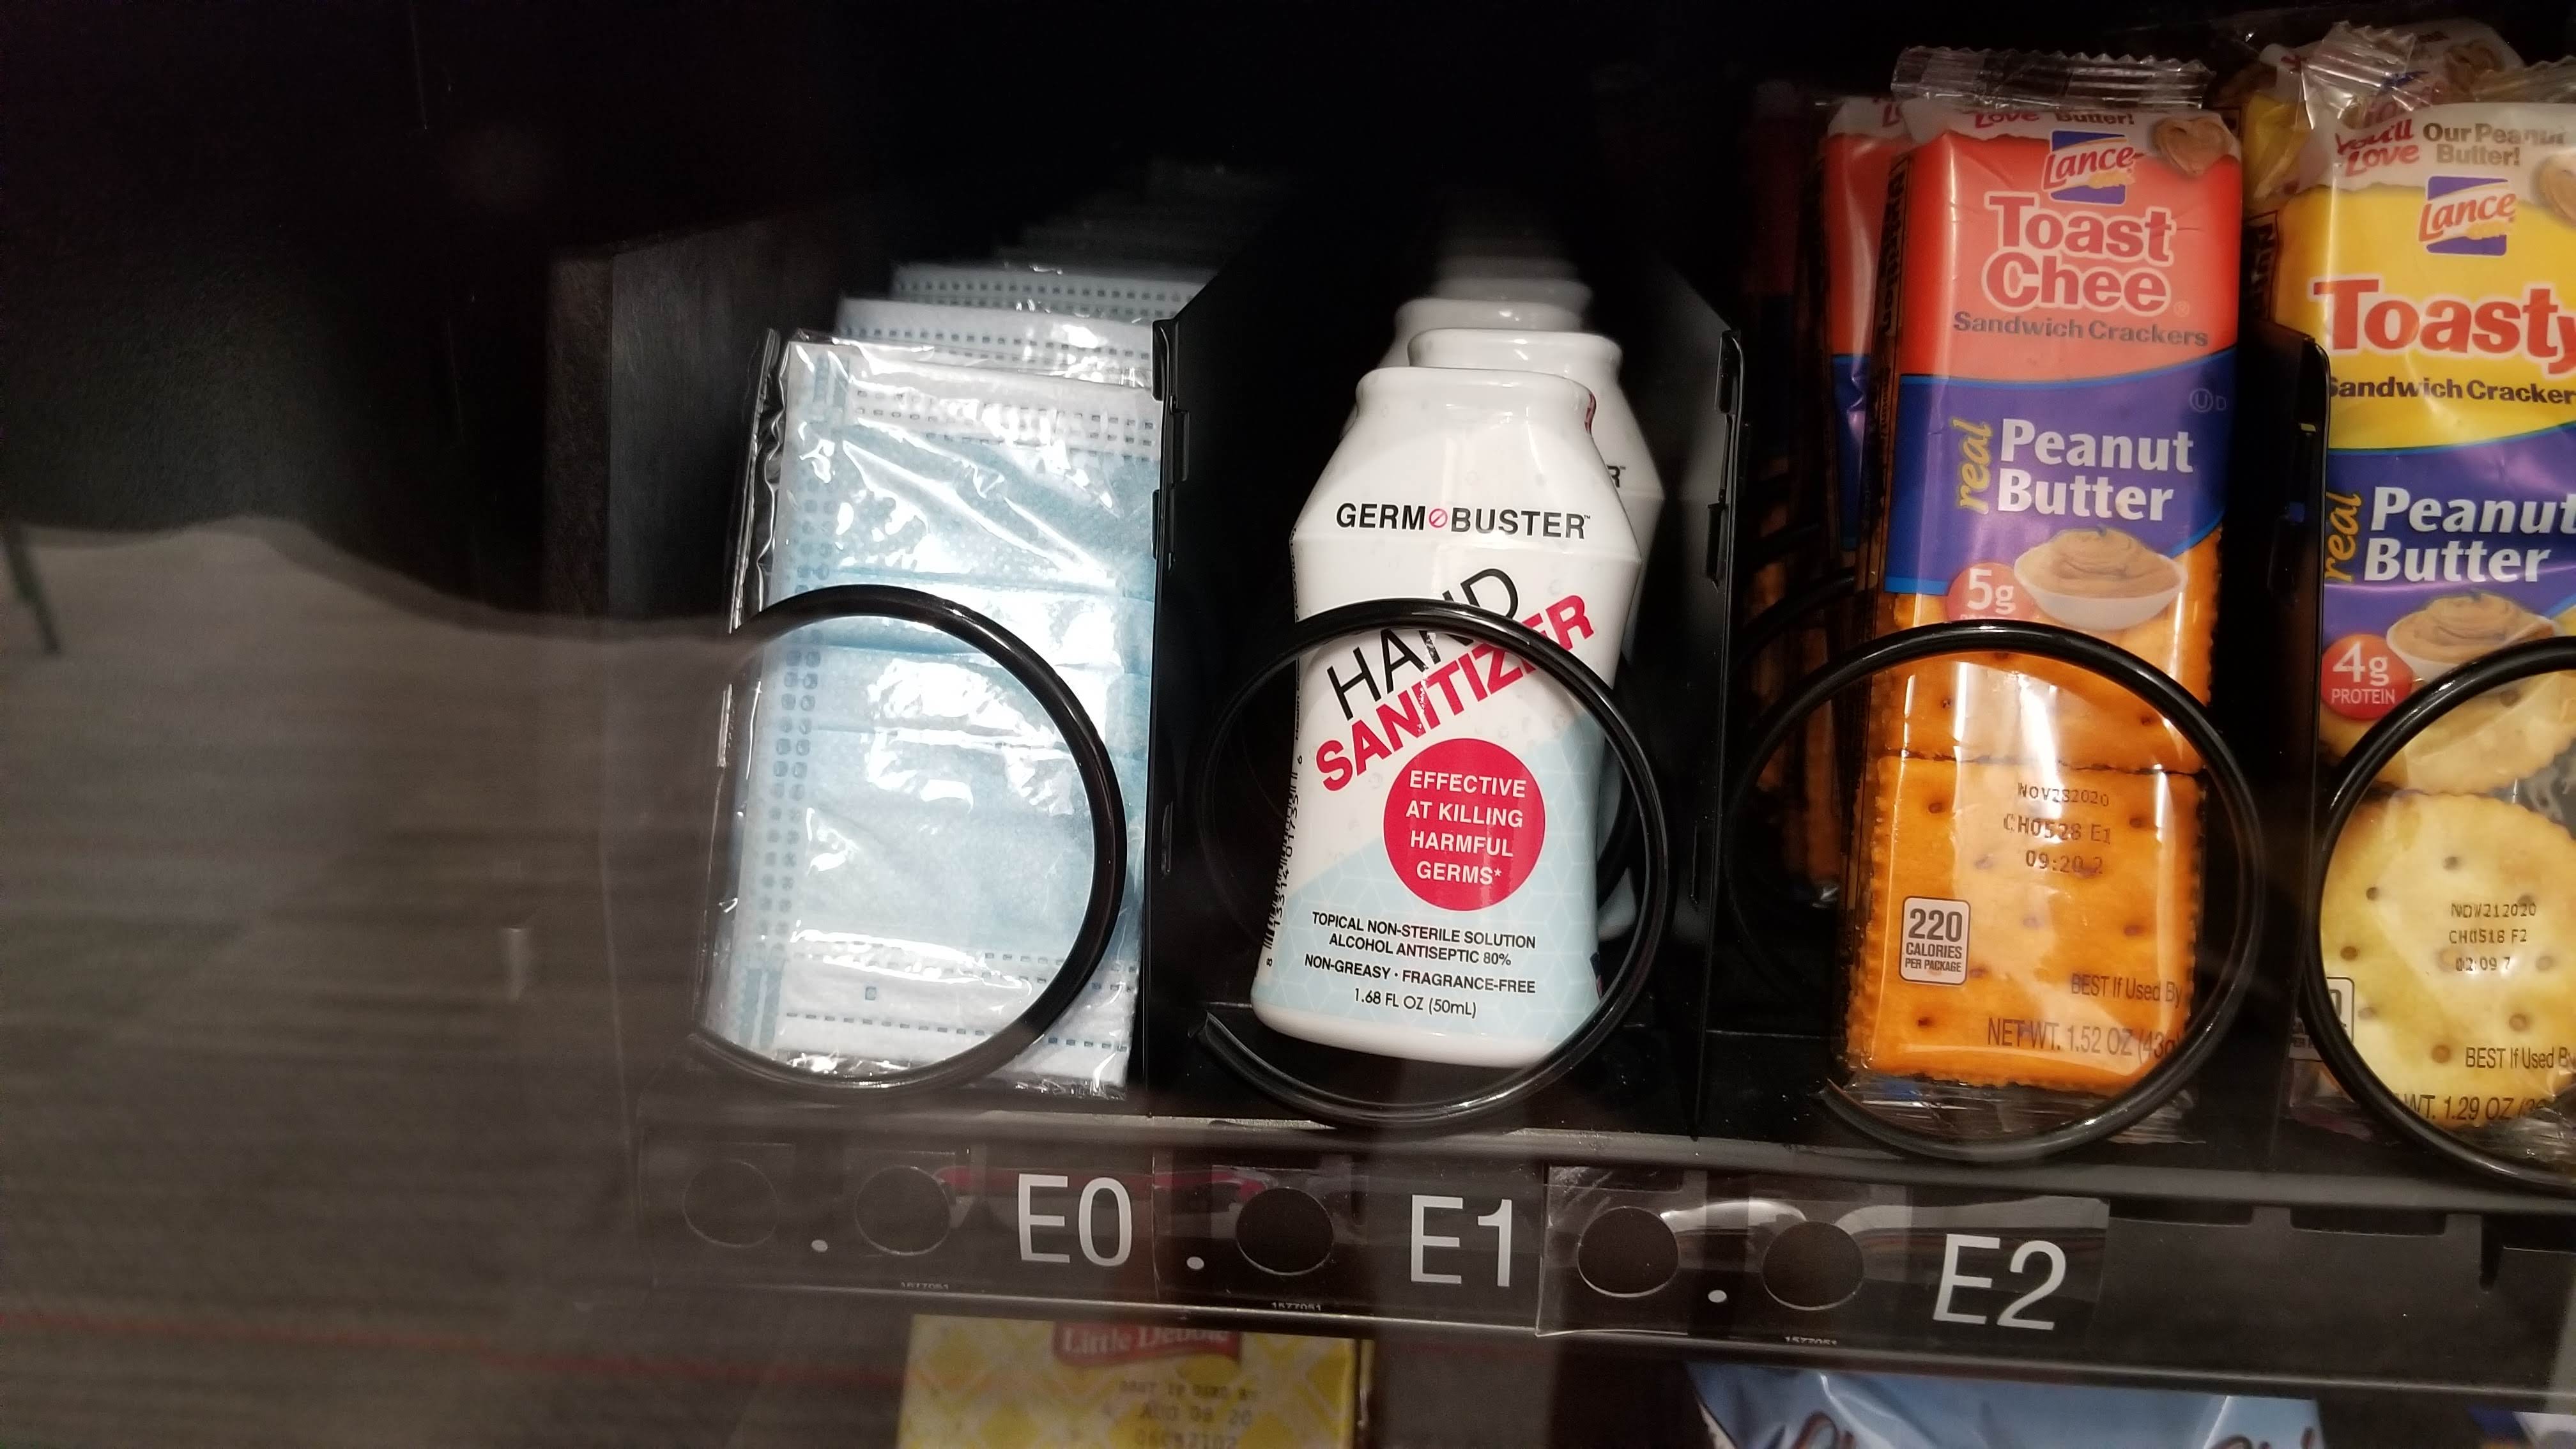 Vending machine during COVID, complete with masks and hand sanitizer.